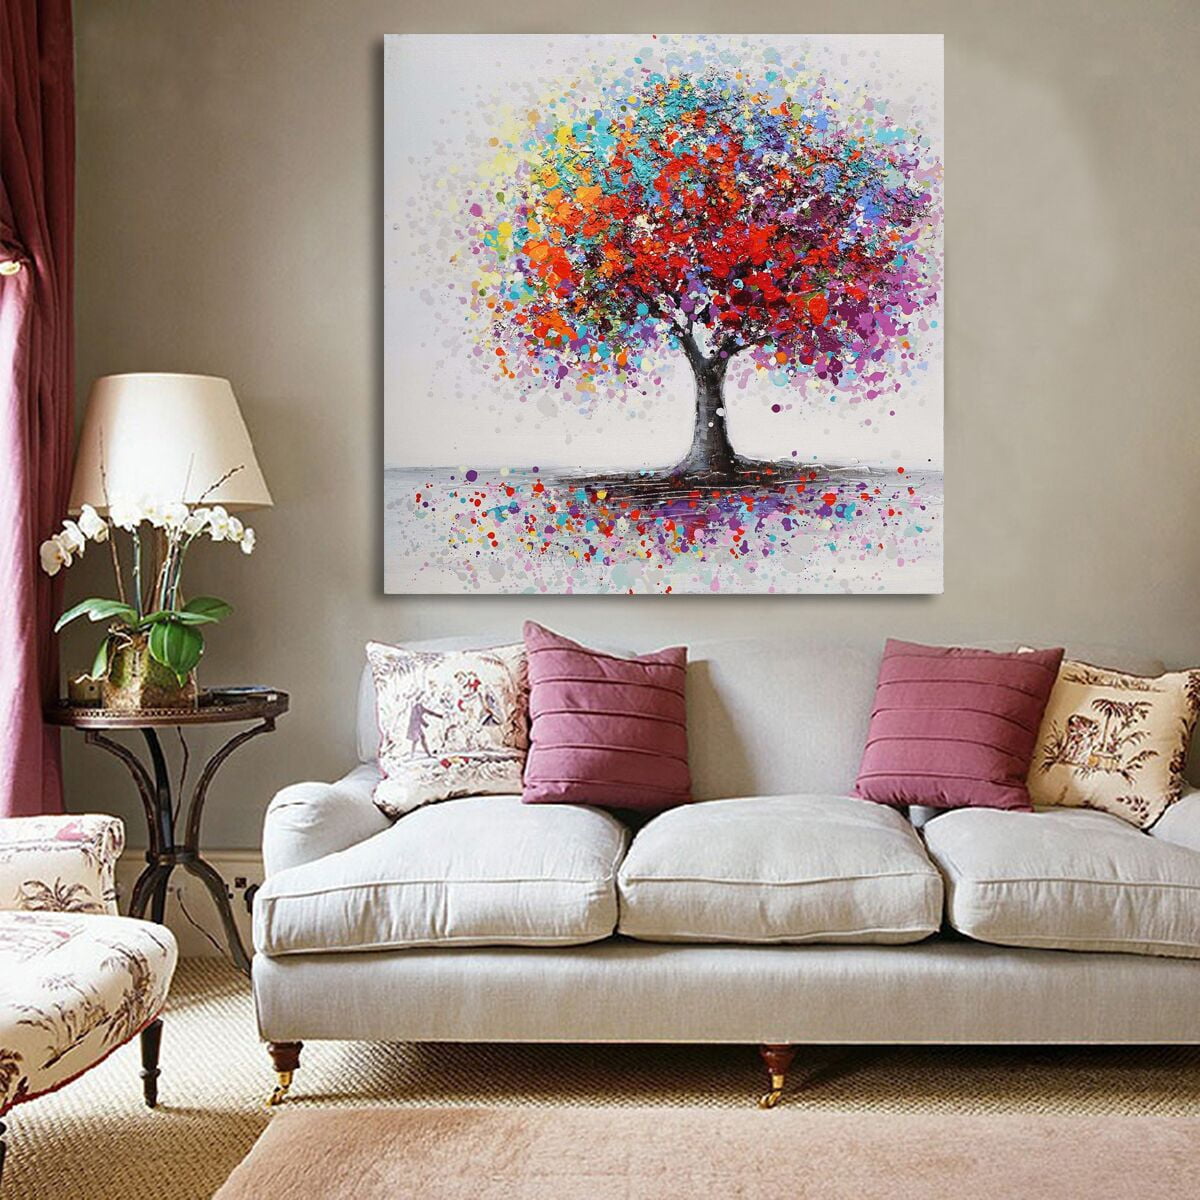 Kreative Arts Large Wall Art Painting Contemporary Pink Tree in Black and White Fall Landscape Picture Modern Giclee Stretched and Framed Artwork for Office Living Room Decoration20x40in Pink Tree